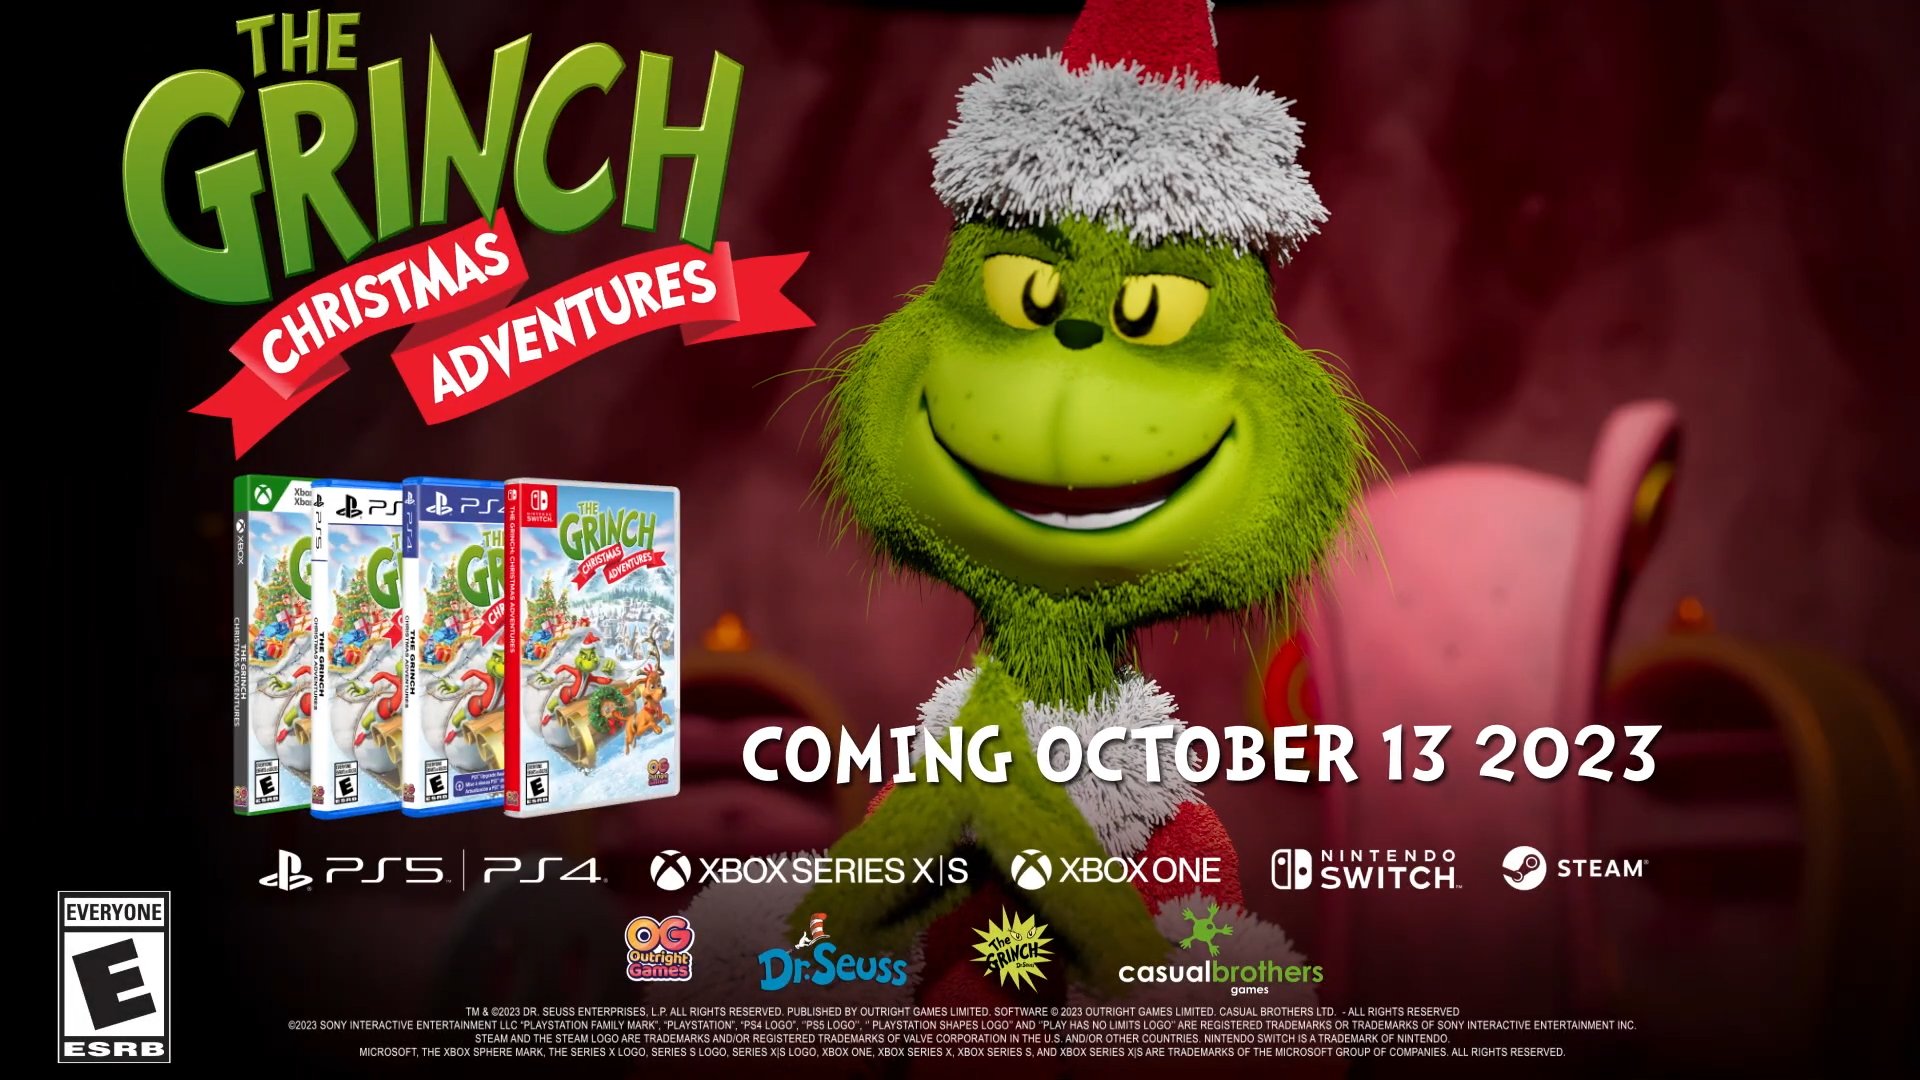 The Grinch Christmas Adventures announce trailer (out Oct 13, has a